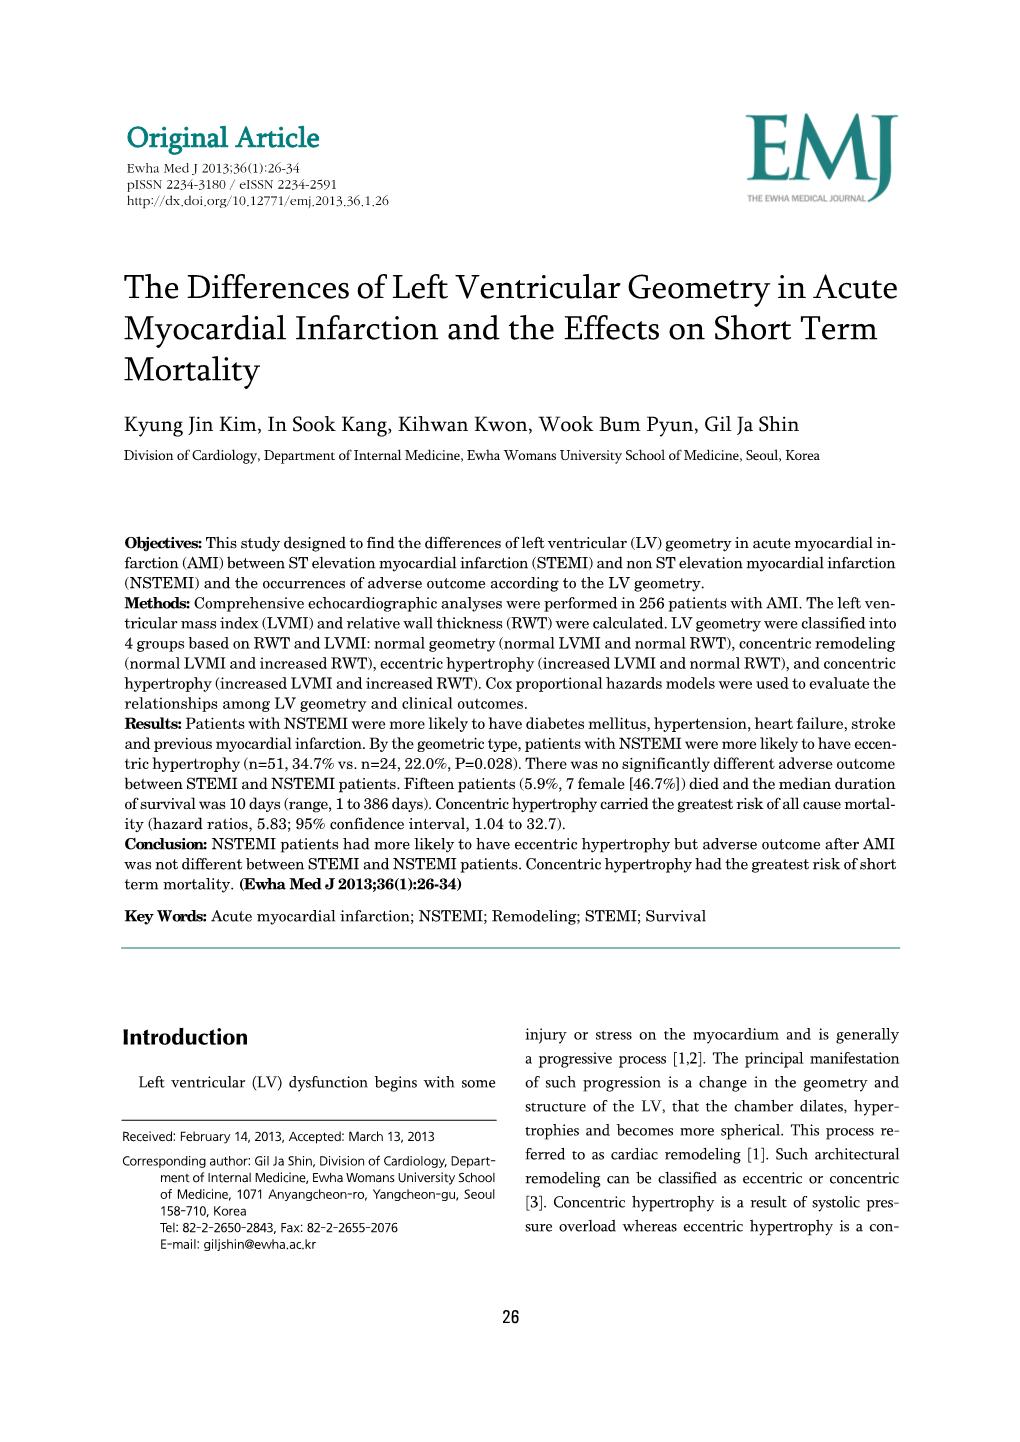 The Differences of Left Ventricular Geometry in Acute Myocardial Infarction and the Effects on Short Term Mortality